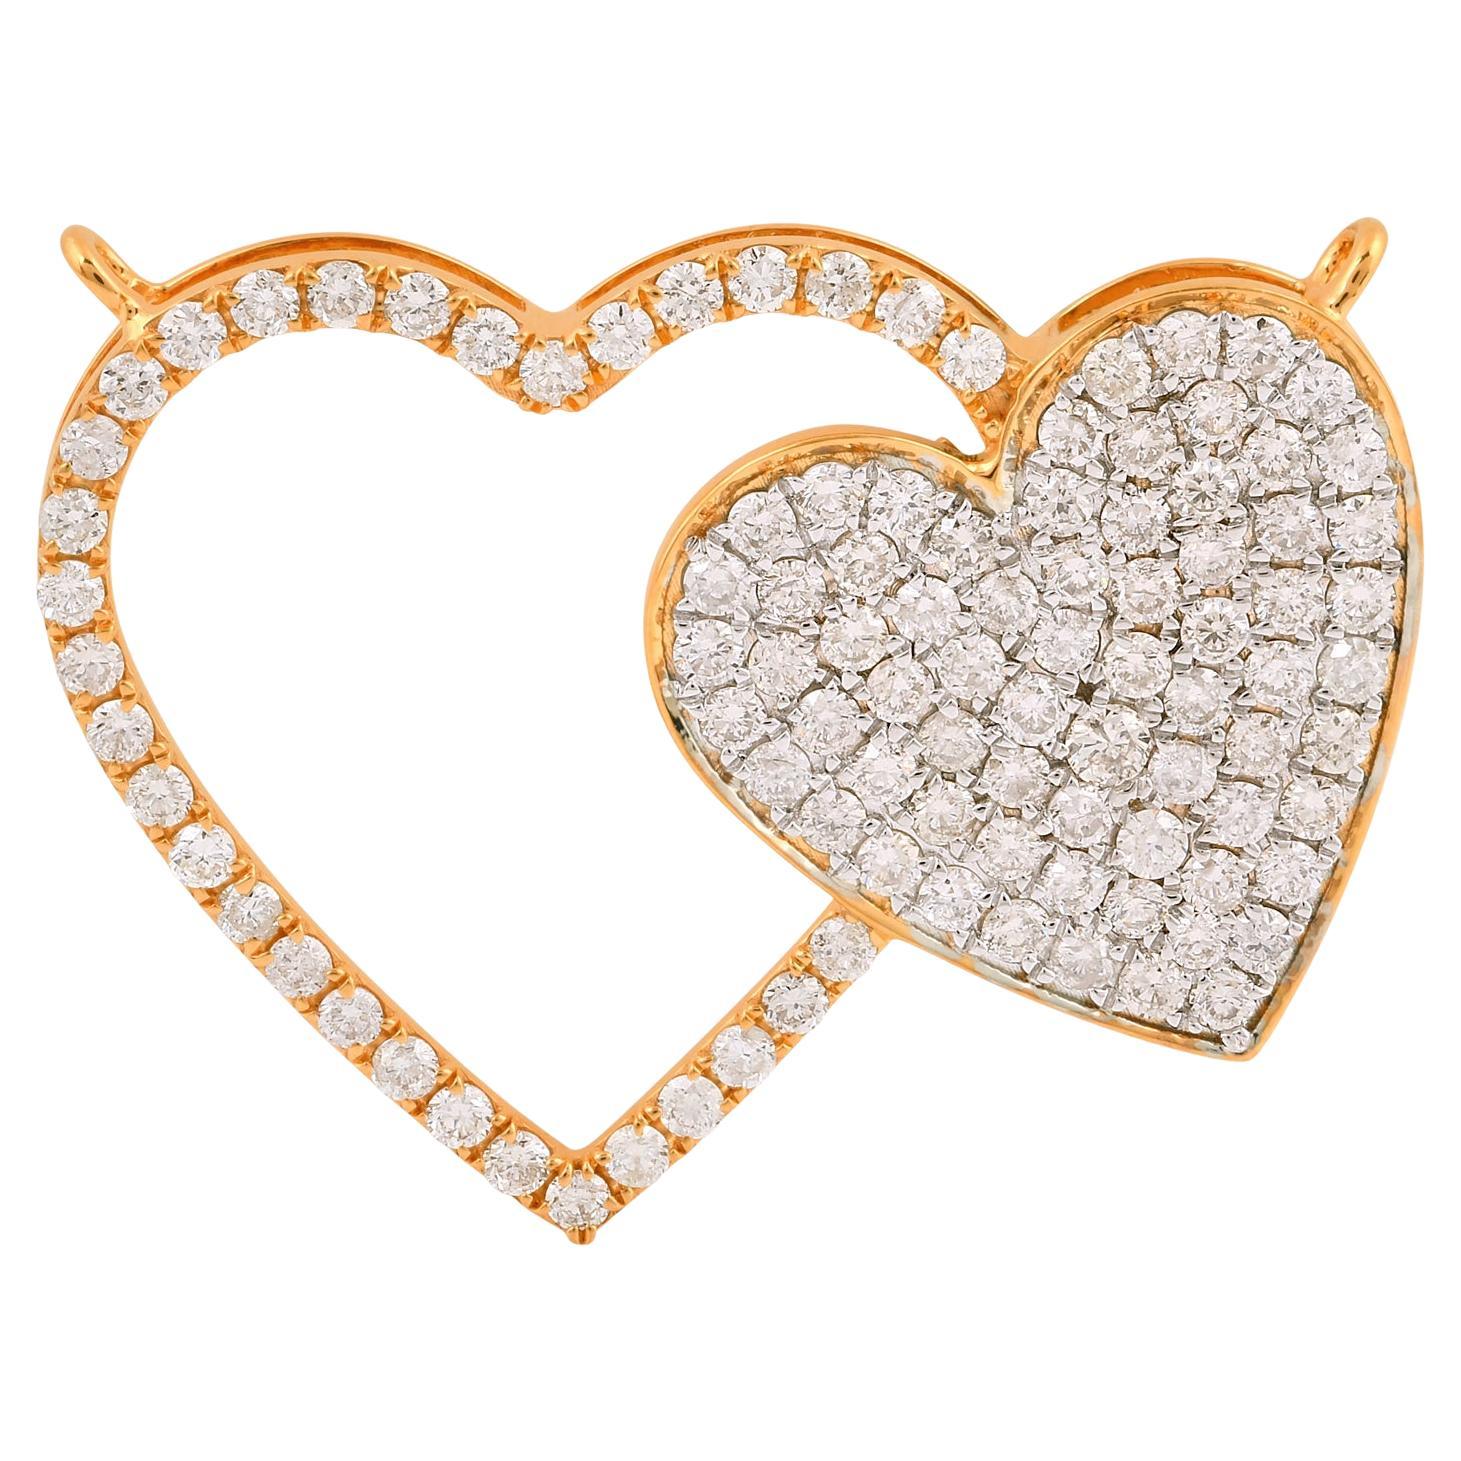 1.50 Carat Diamond Pave Double Heart Charm Pendant Solid 14k Yellow Gold Jewelry